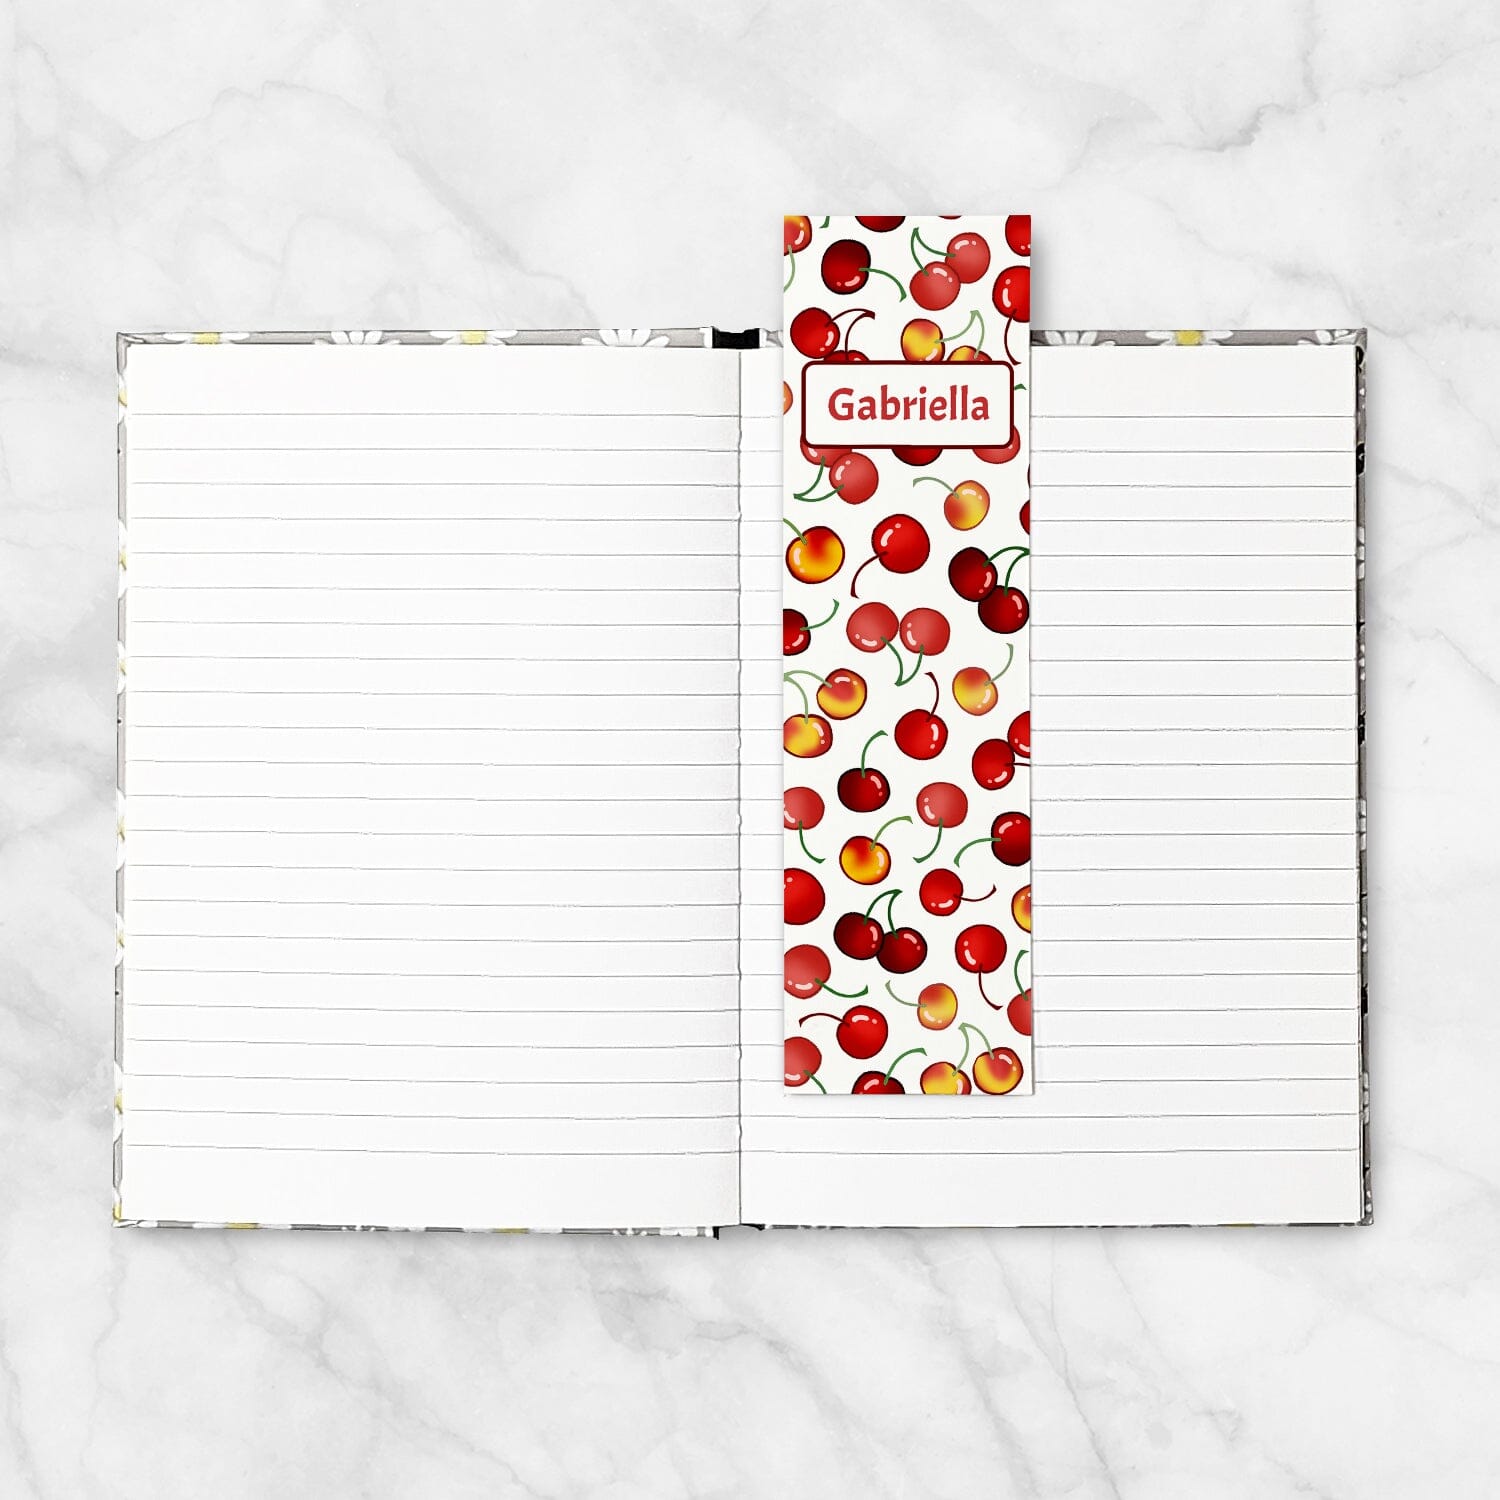 Printable Personalized Cherries Bookmarks at Printable Planning. Example of bookmark in an open hardcover notebook.